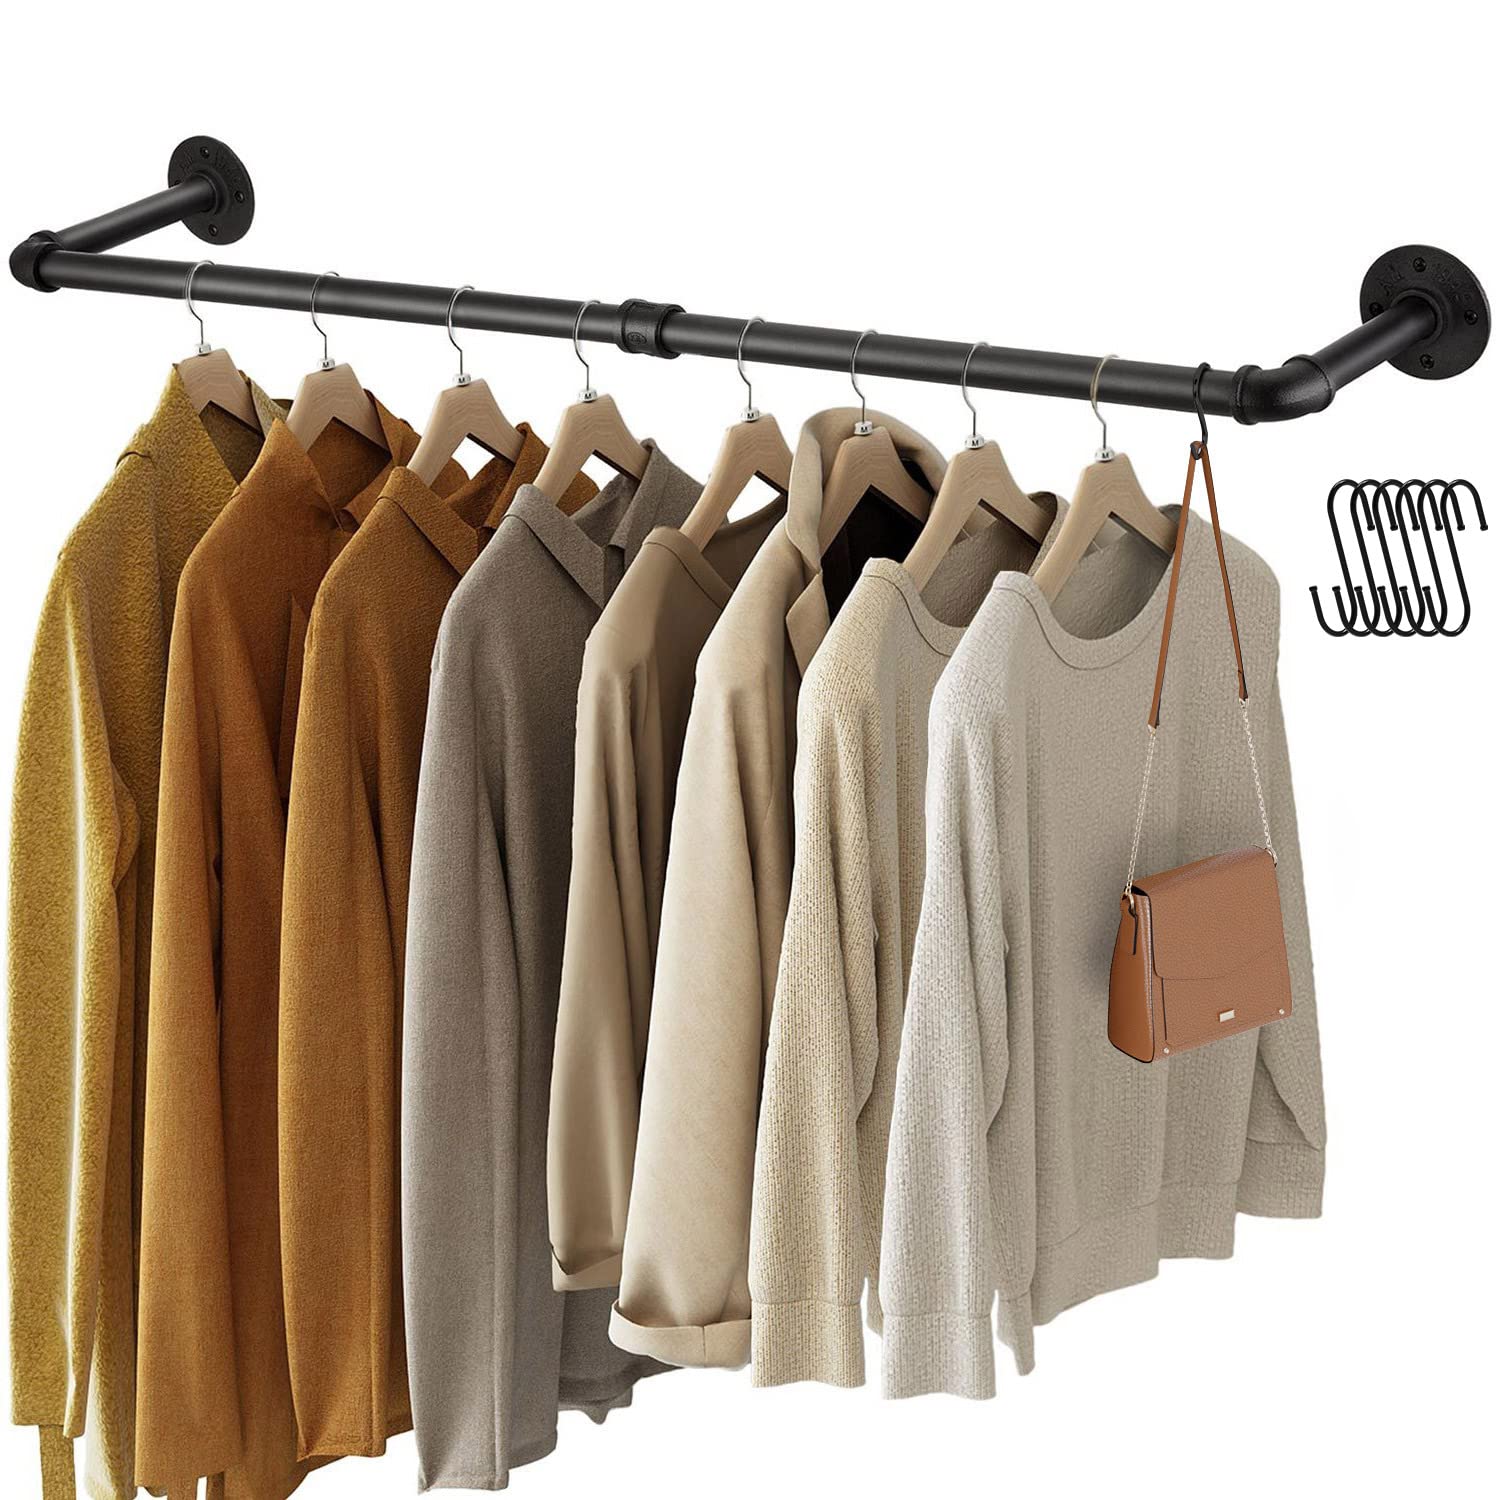 gREENSTELL clothes Rack,362 Inch Industrial Pipe Wall Mounted garment Rack,Space-Saving Hanging clothes Rack,Heavy Duty Detachab